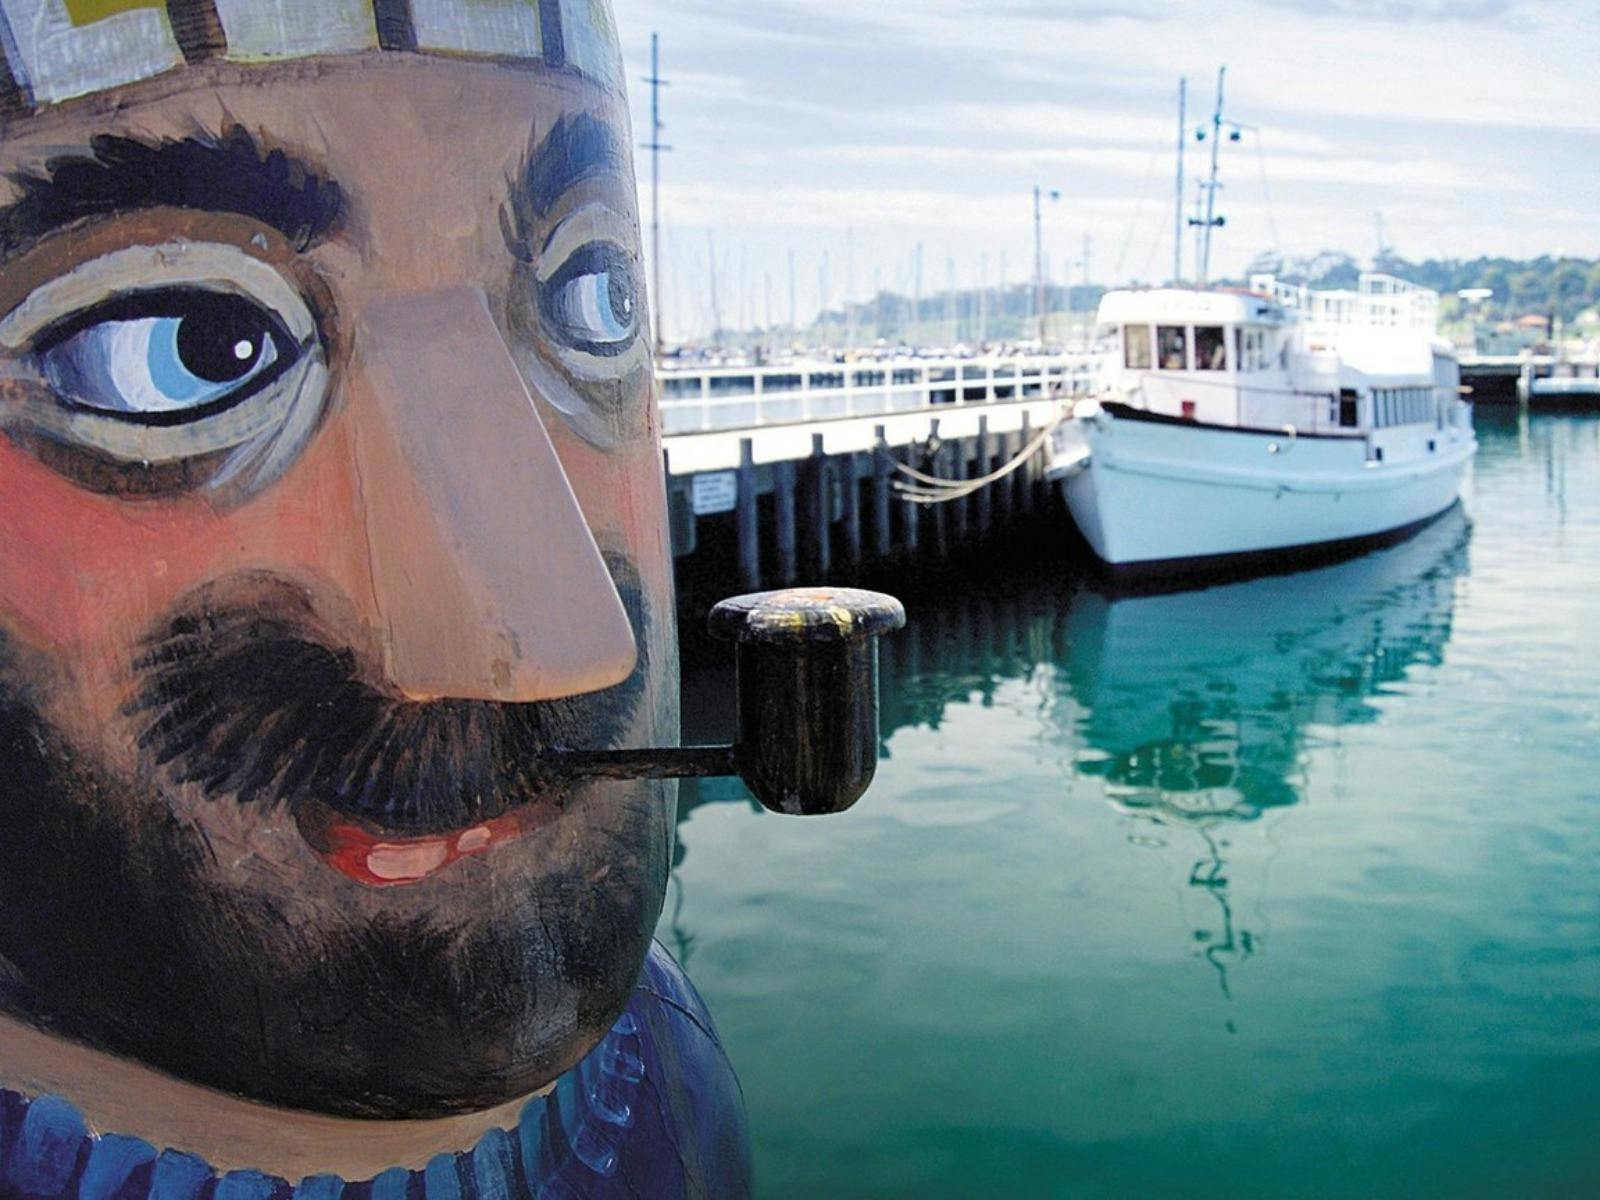 Fisherman Bollard with pipe in mouth boat in water in background